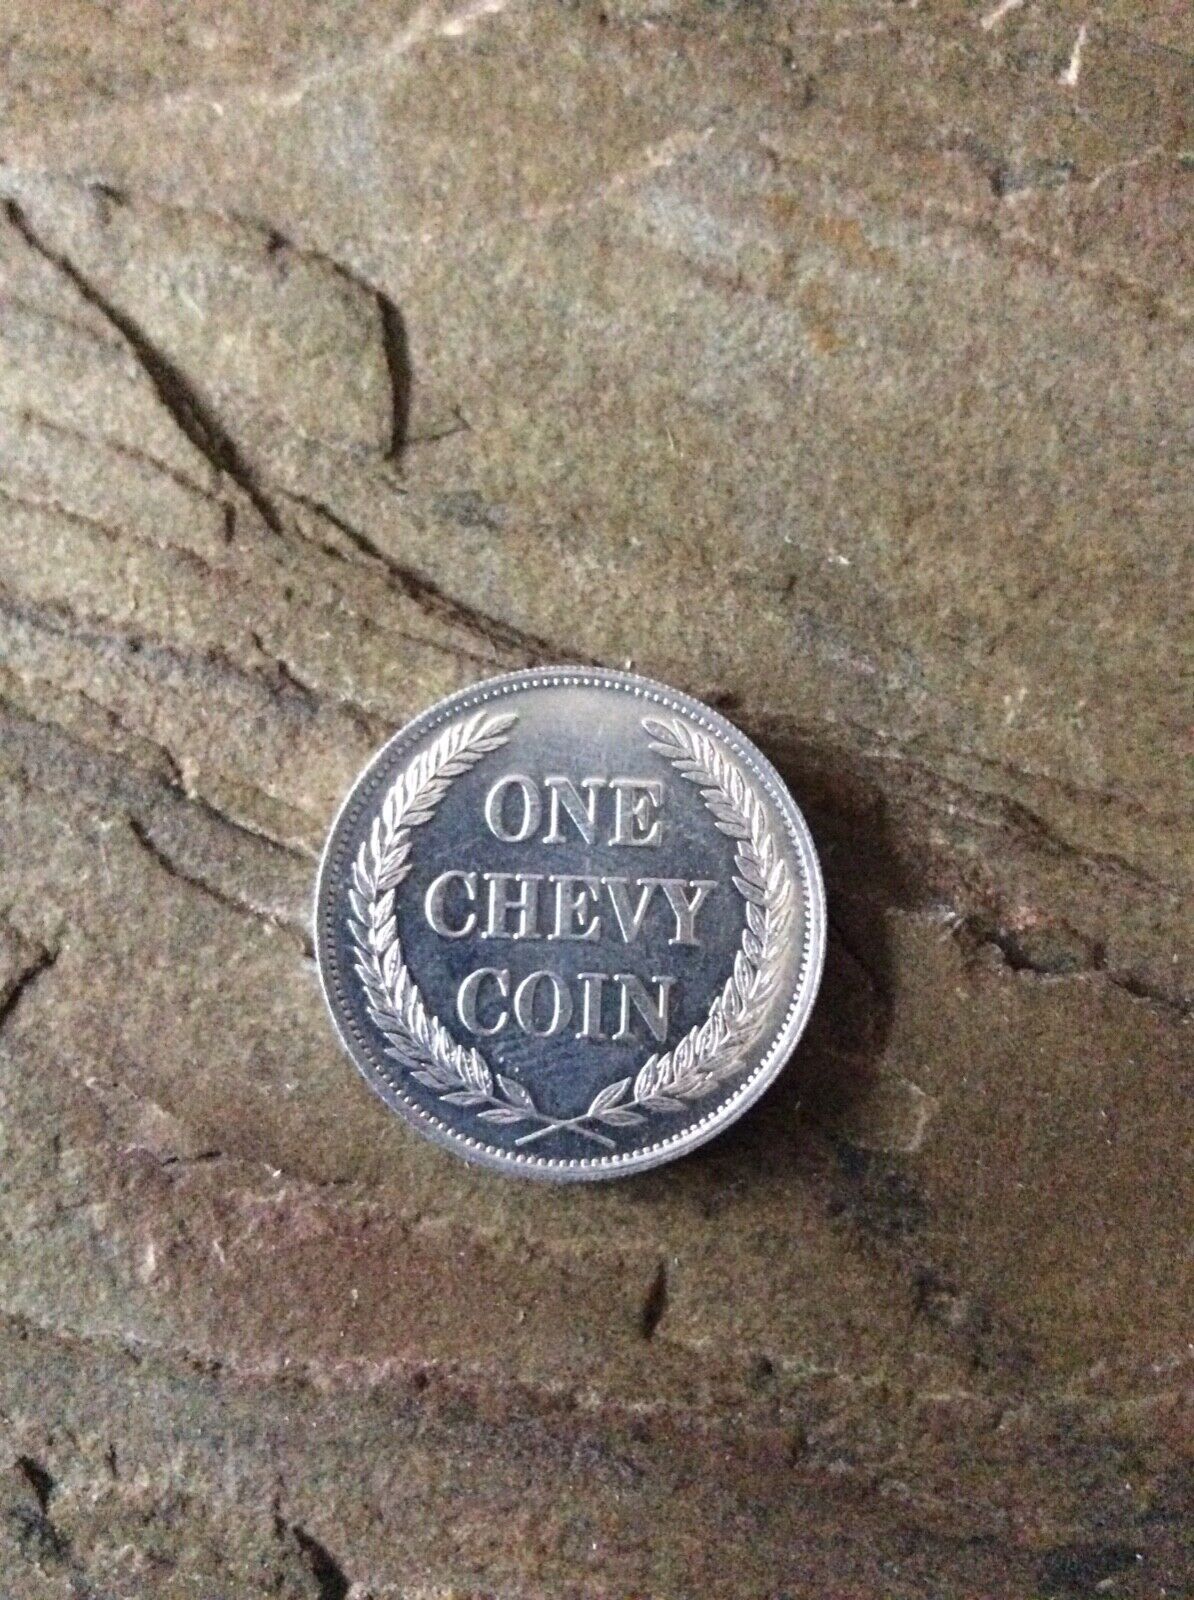 VINTAGE CHEVROLET ONE CHEVY COIN  ALUMINUM TOKEN AUTOMOBILIA  NEW, OLD STOCK ❤️